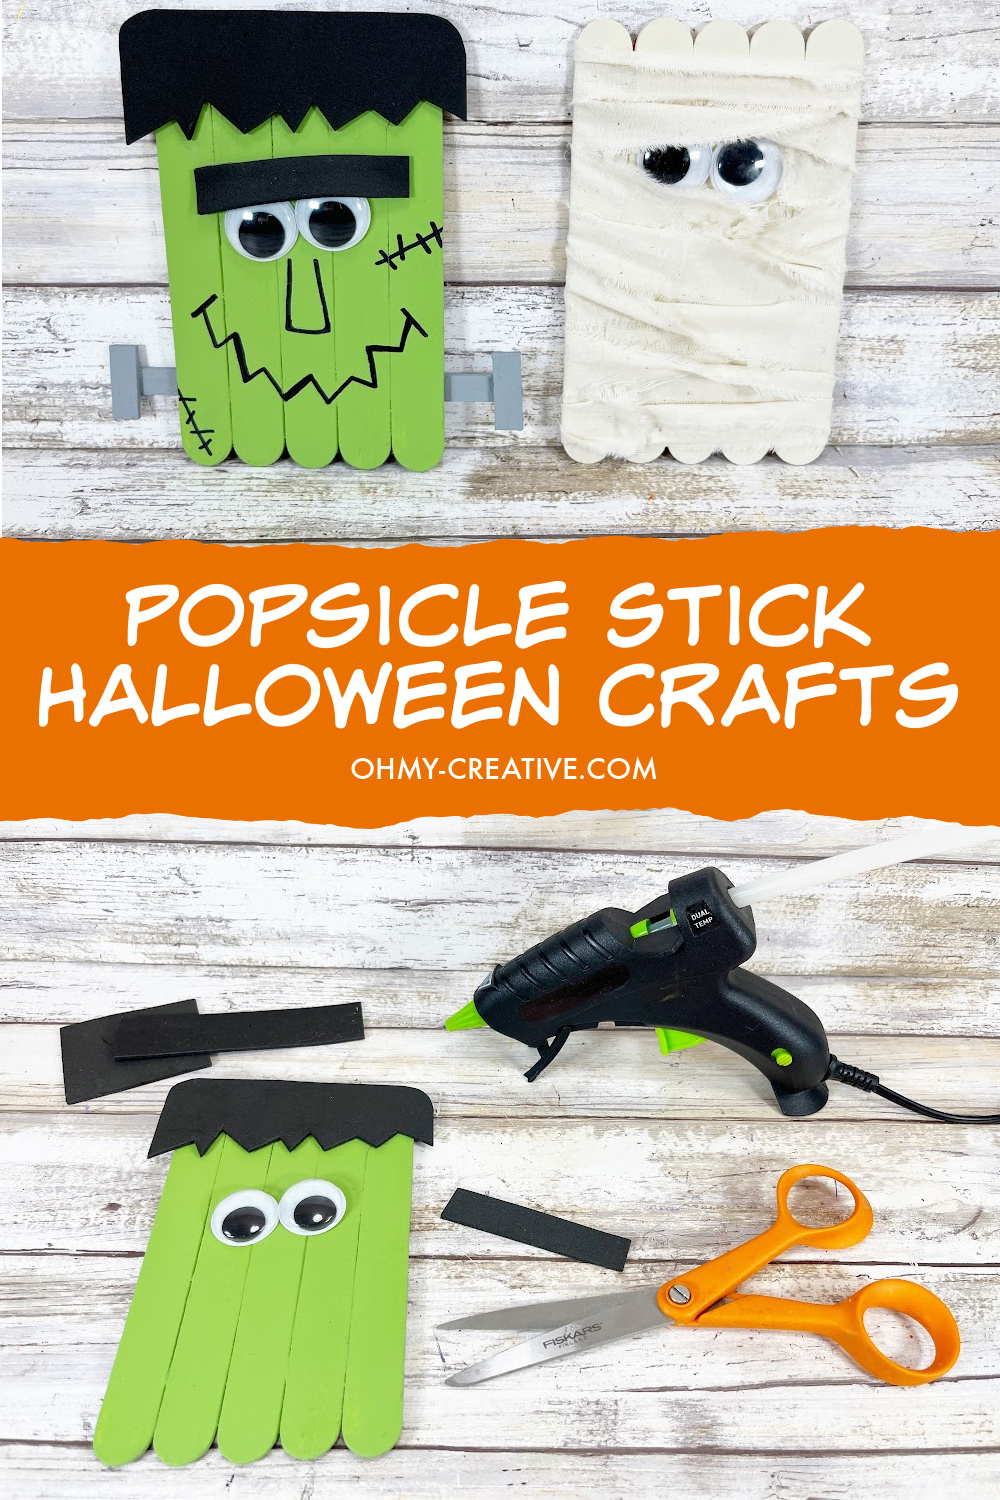 How to make craft stick Frankenstein craft and a mummy craft with popsicle sticks.